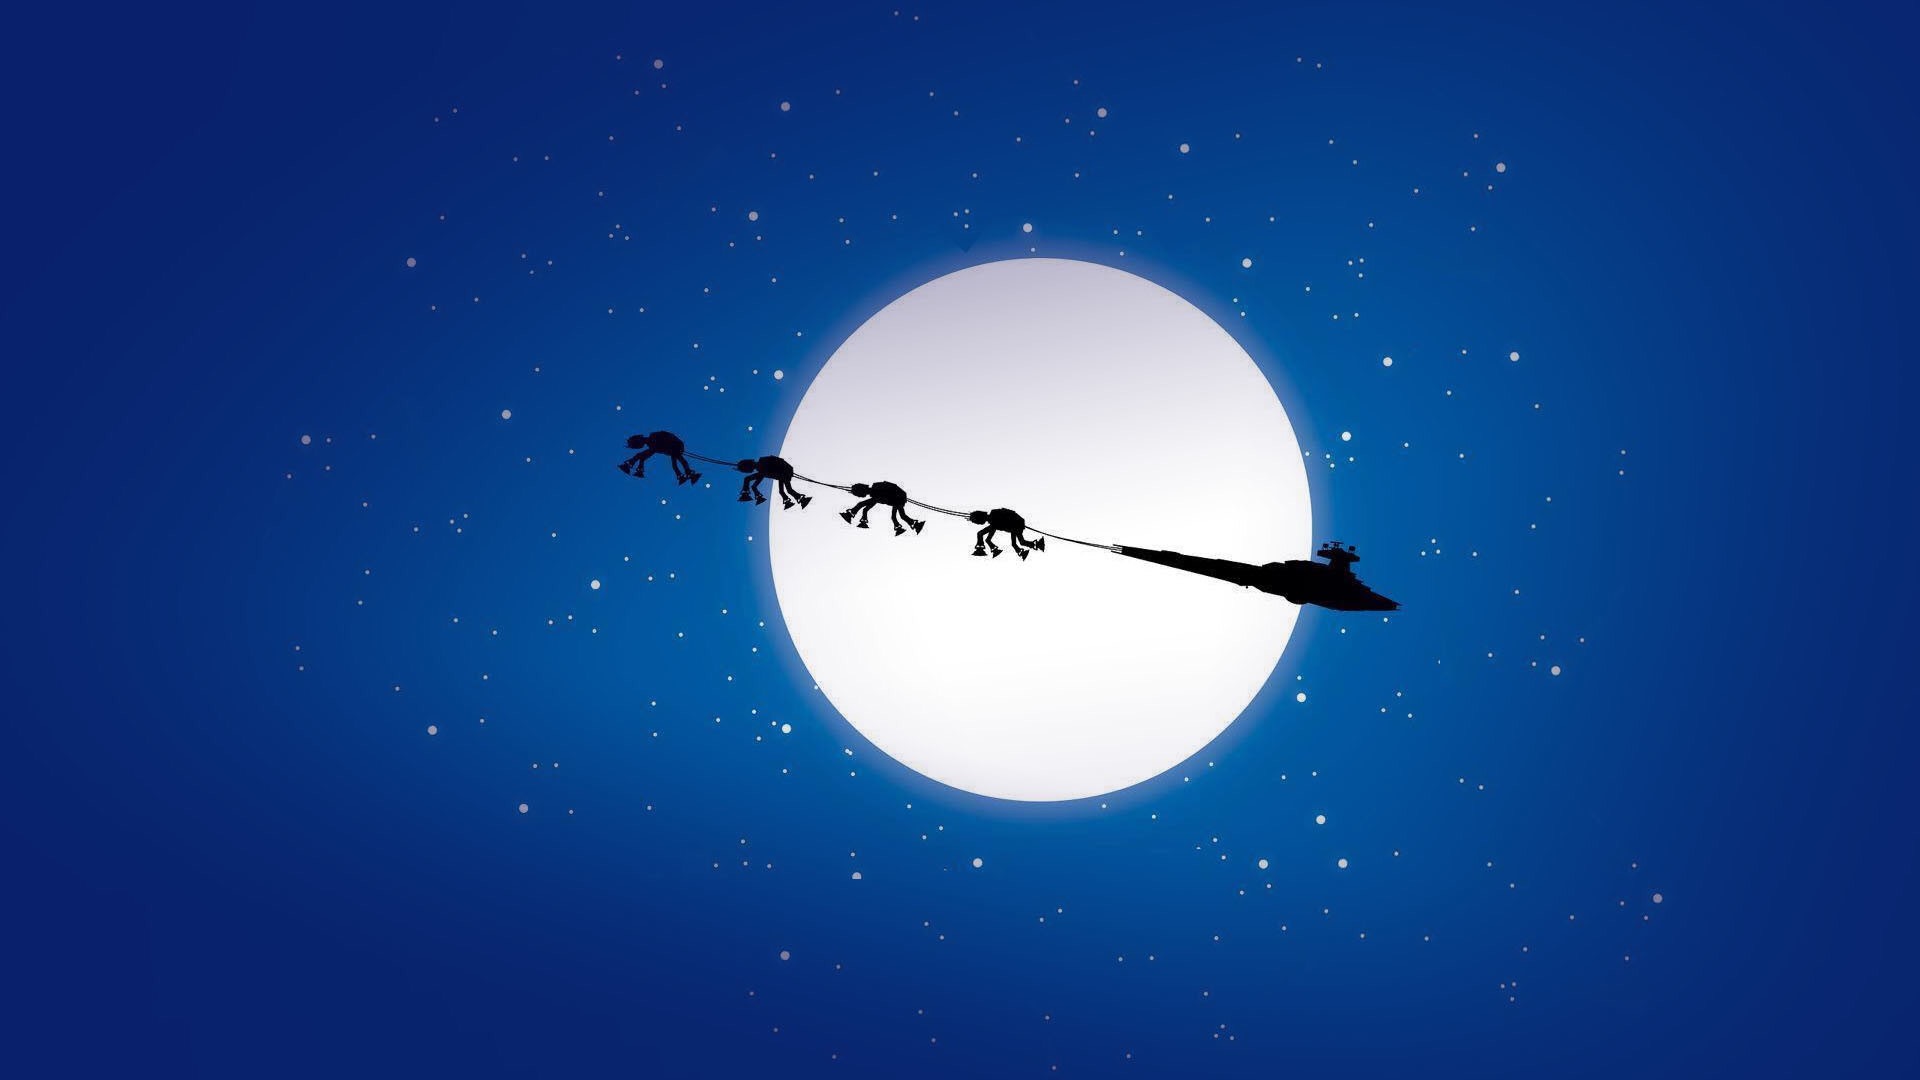 star wars christmas wallpaper,sky,blue,atmosphere,daytime,outer space